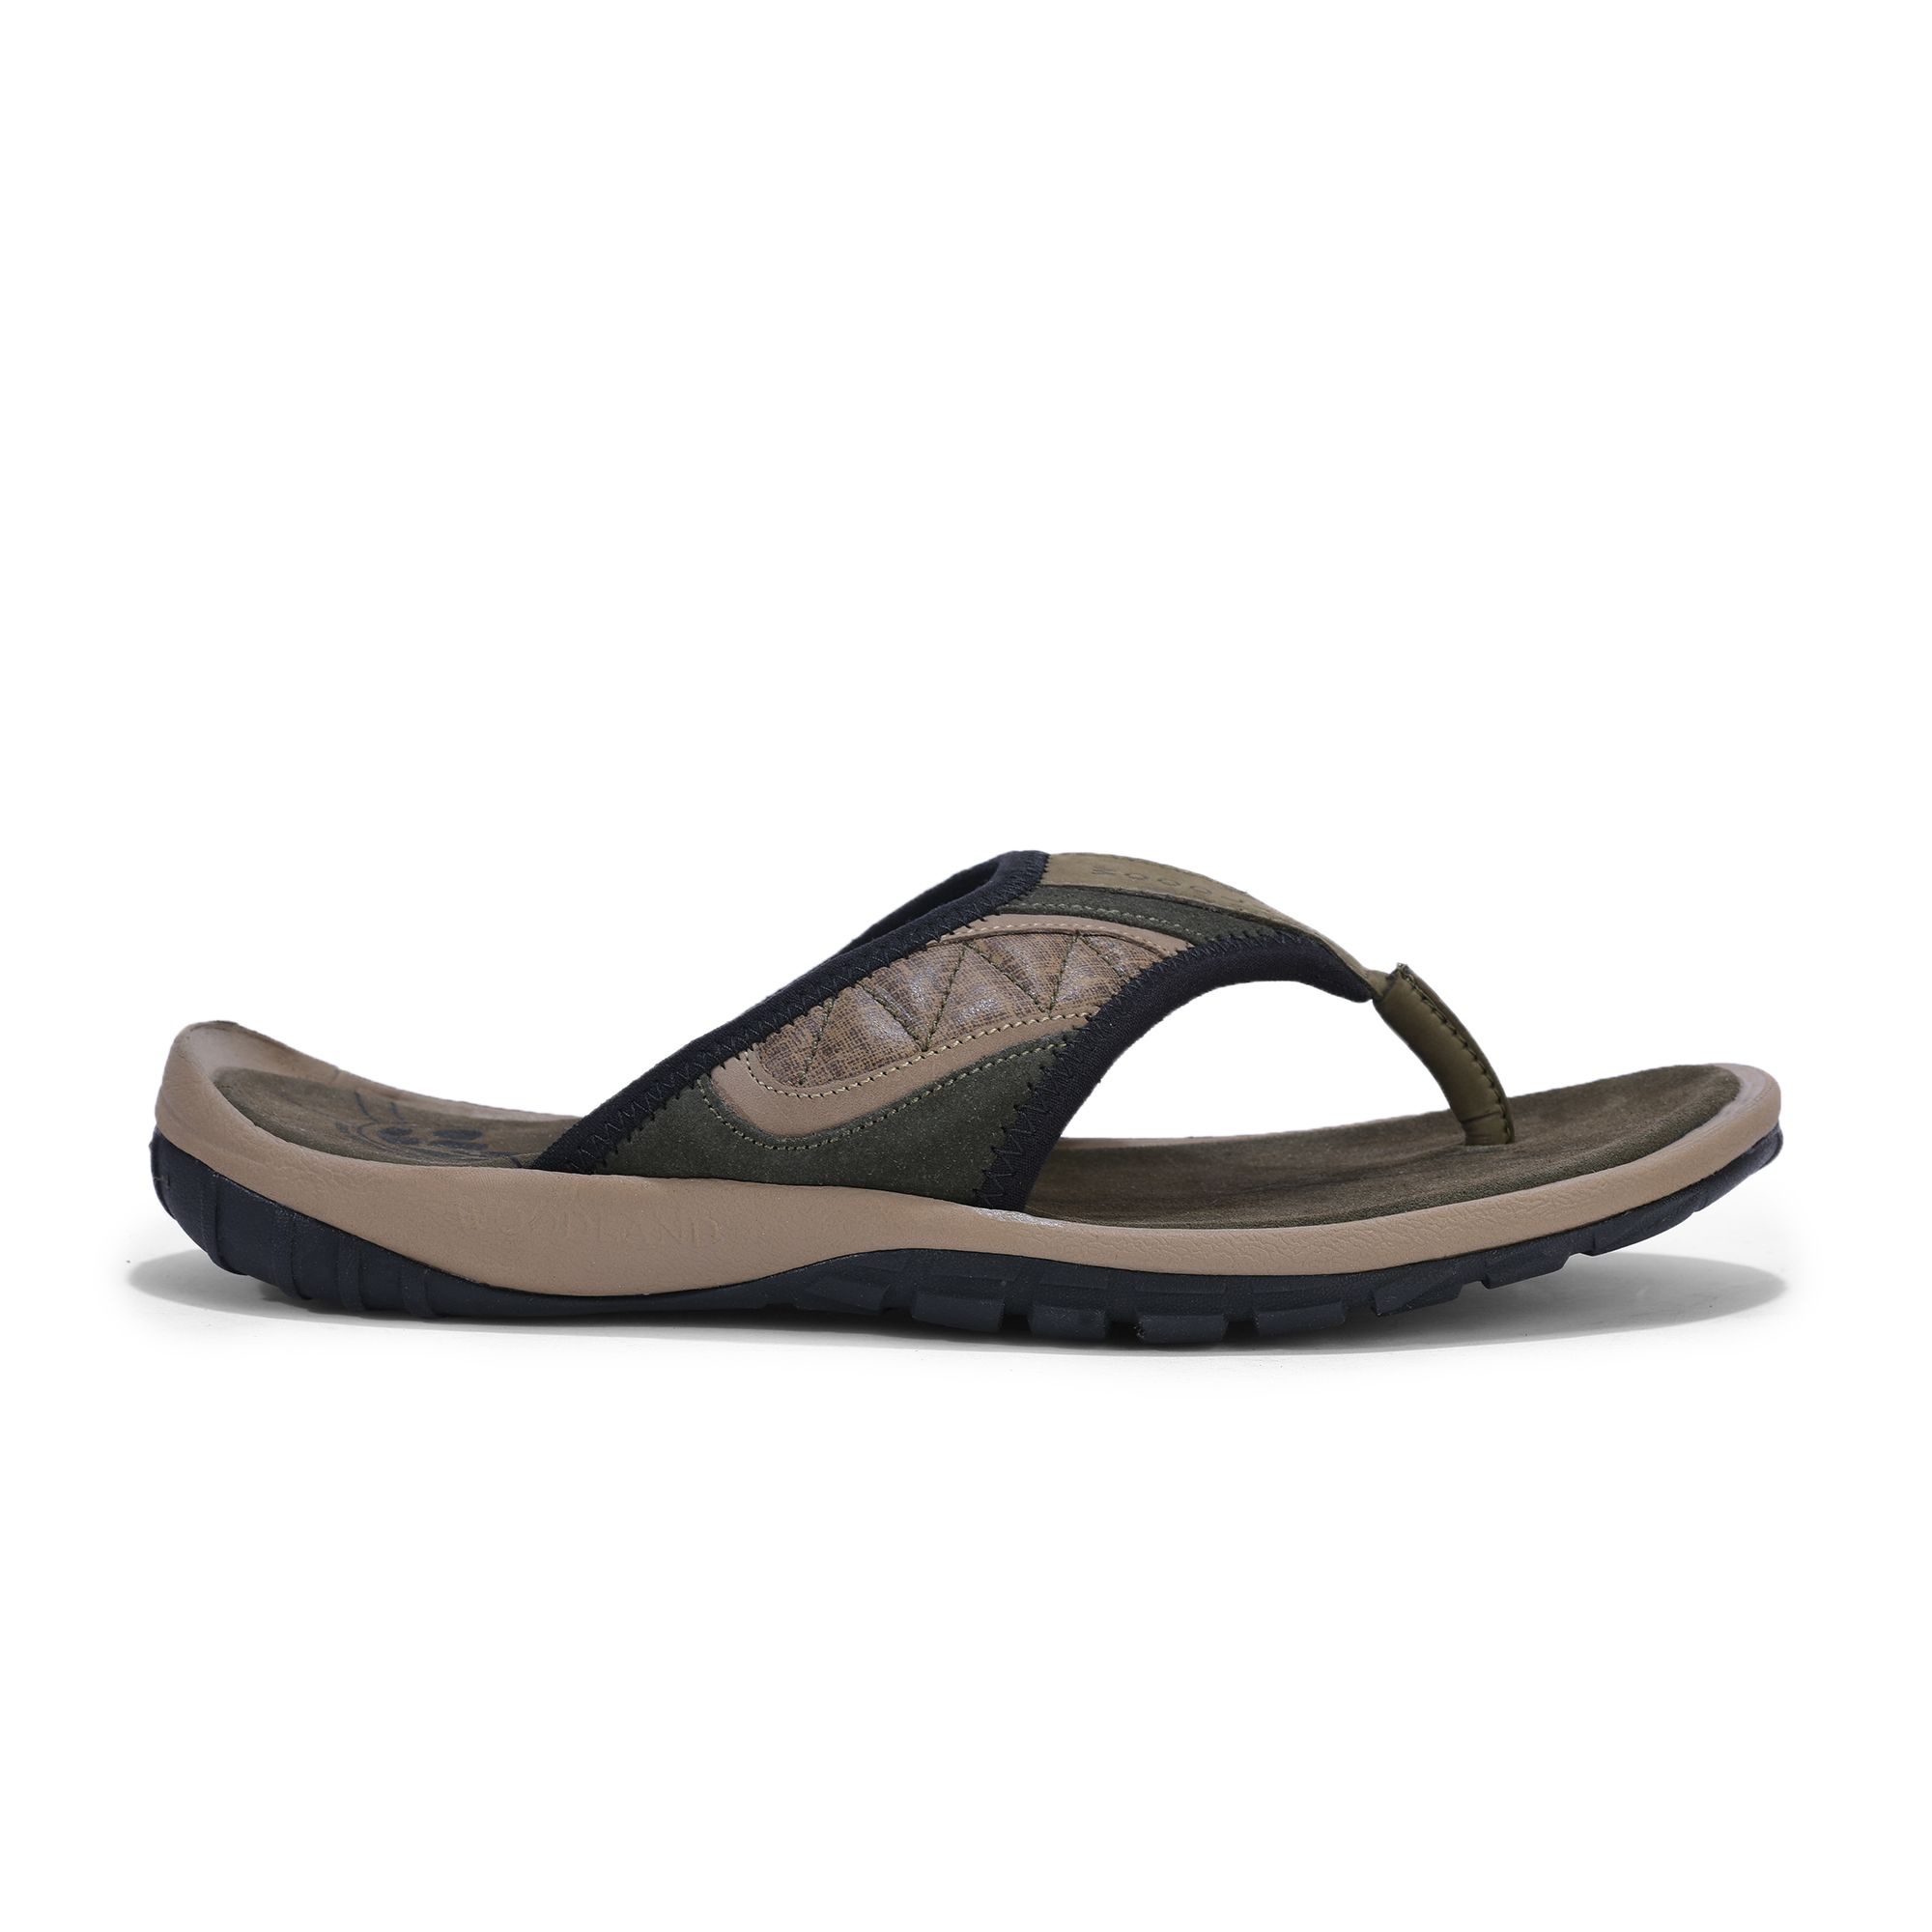 Buy Woodland Shoes & Sandals At Best Prices Online In India | Tata CLiQ